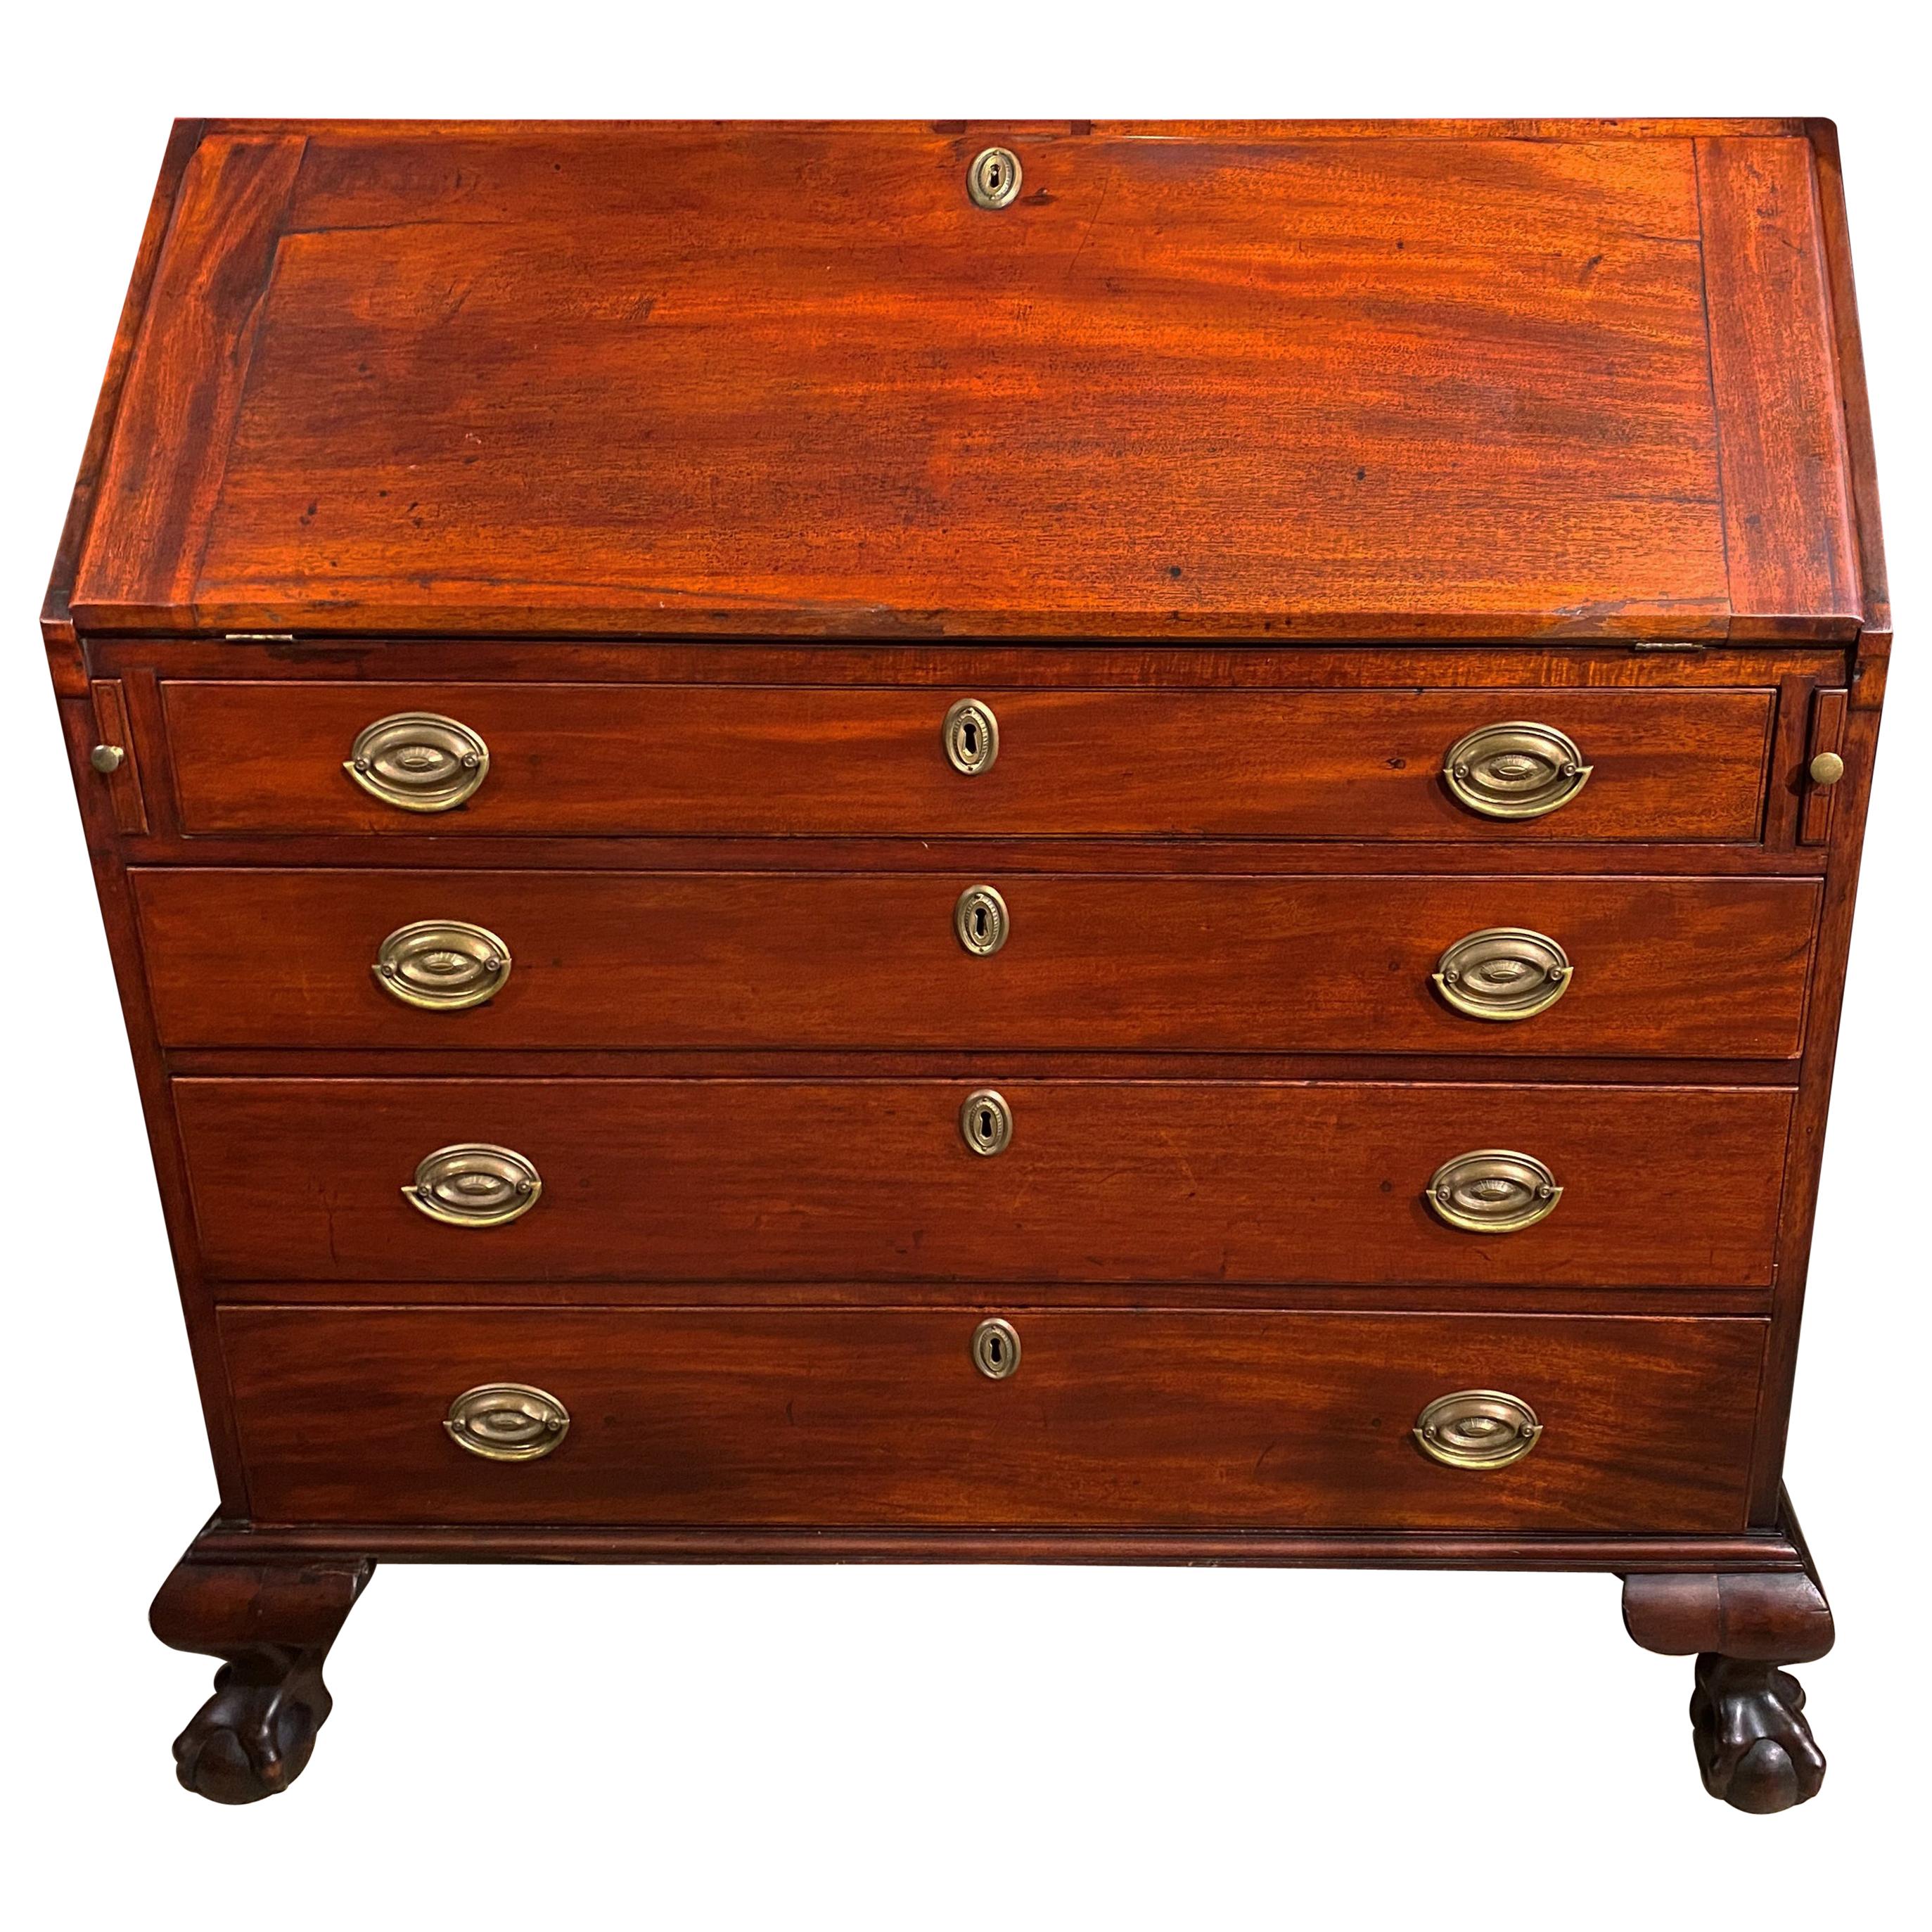 18th Century Boston Chippendale Mahogany Slant Front Desk with Ball & Claw Feet